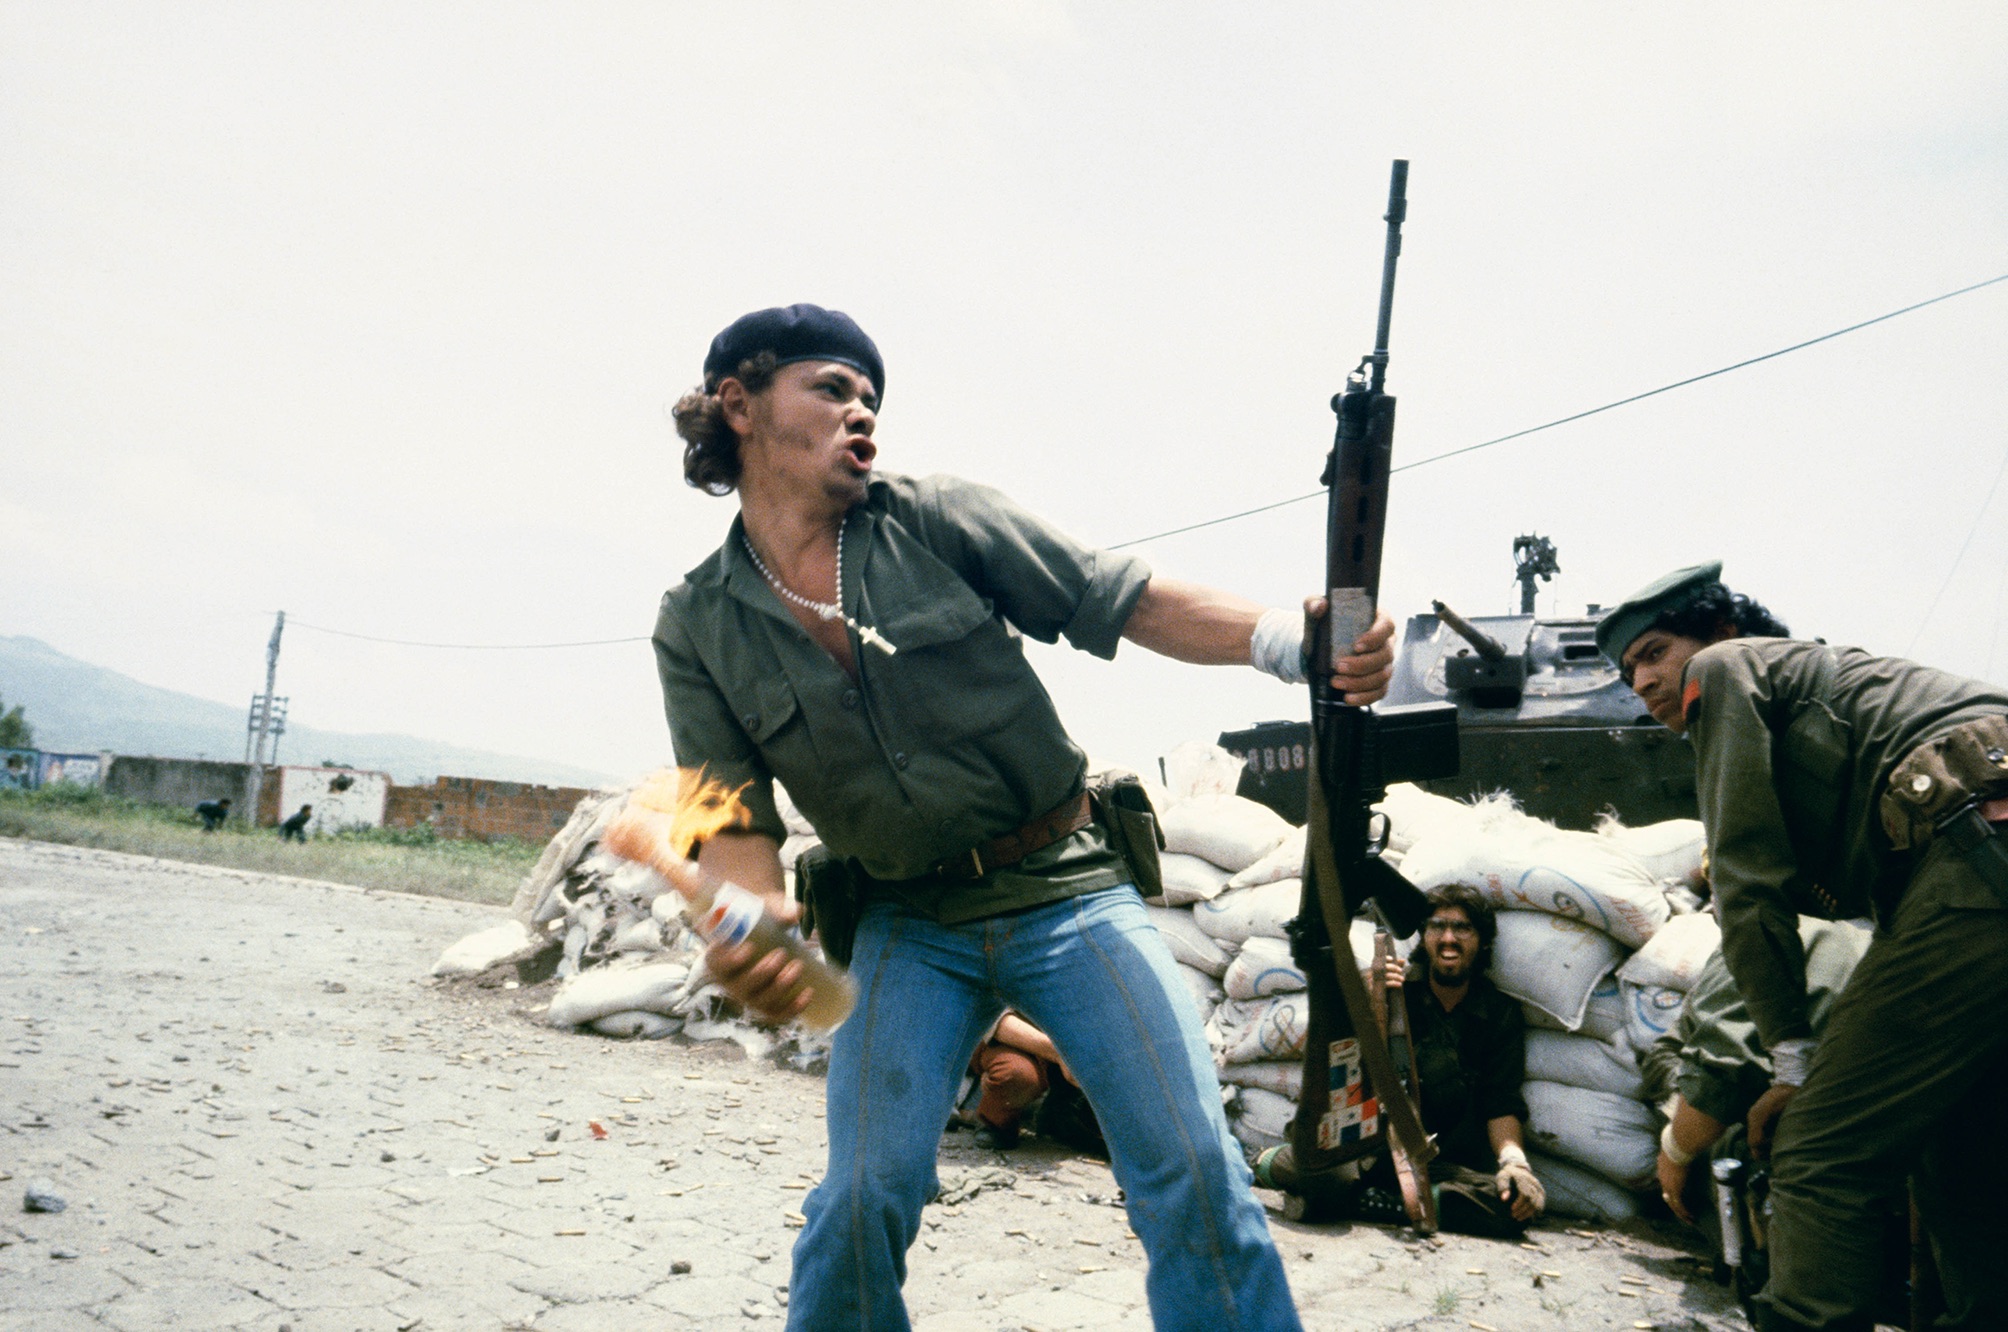 Susan Meiselas, Sandinistas at the gates to the district of National Guard in Esteli, "Man with Molotov Cocktail", Nicaragua, 16 July 1979 Â© Susan Meiselas_ Magnum Photos 